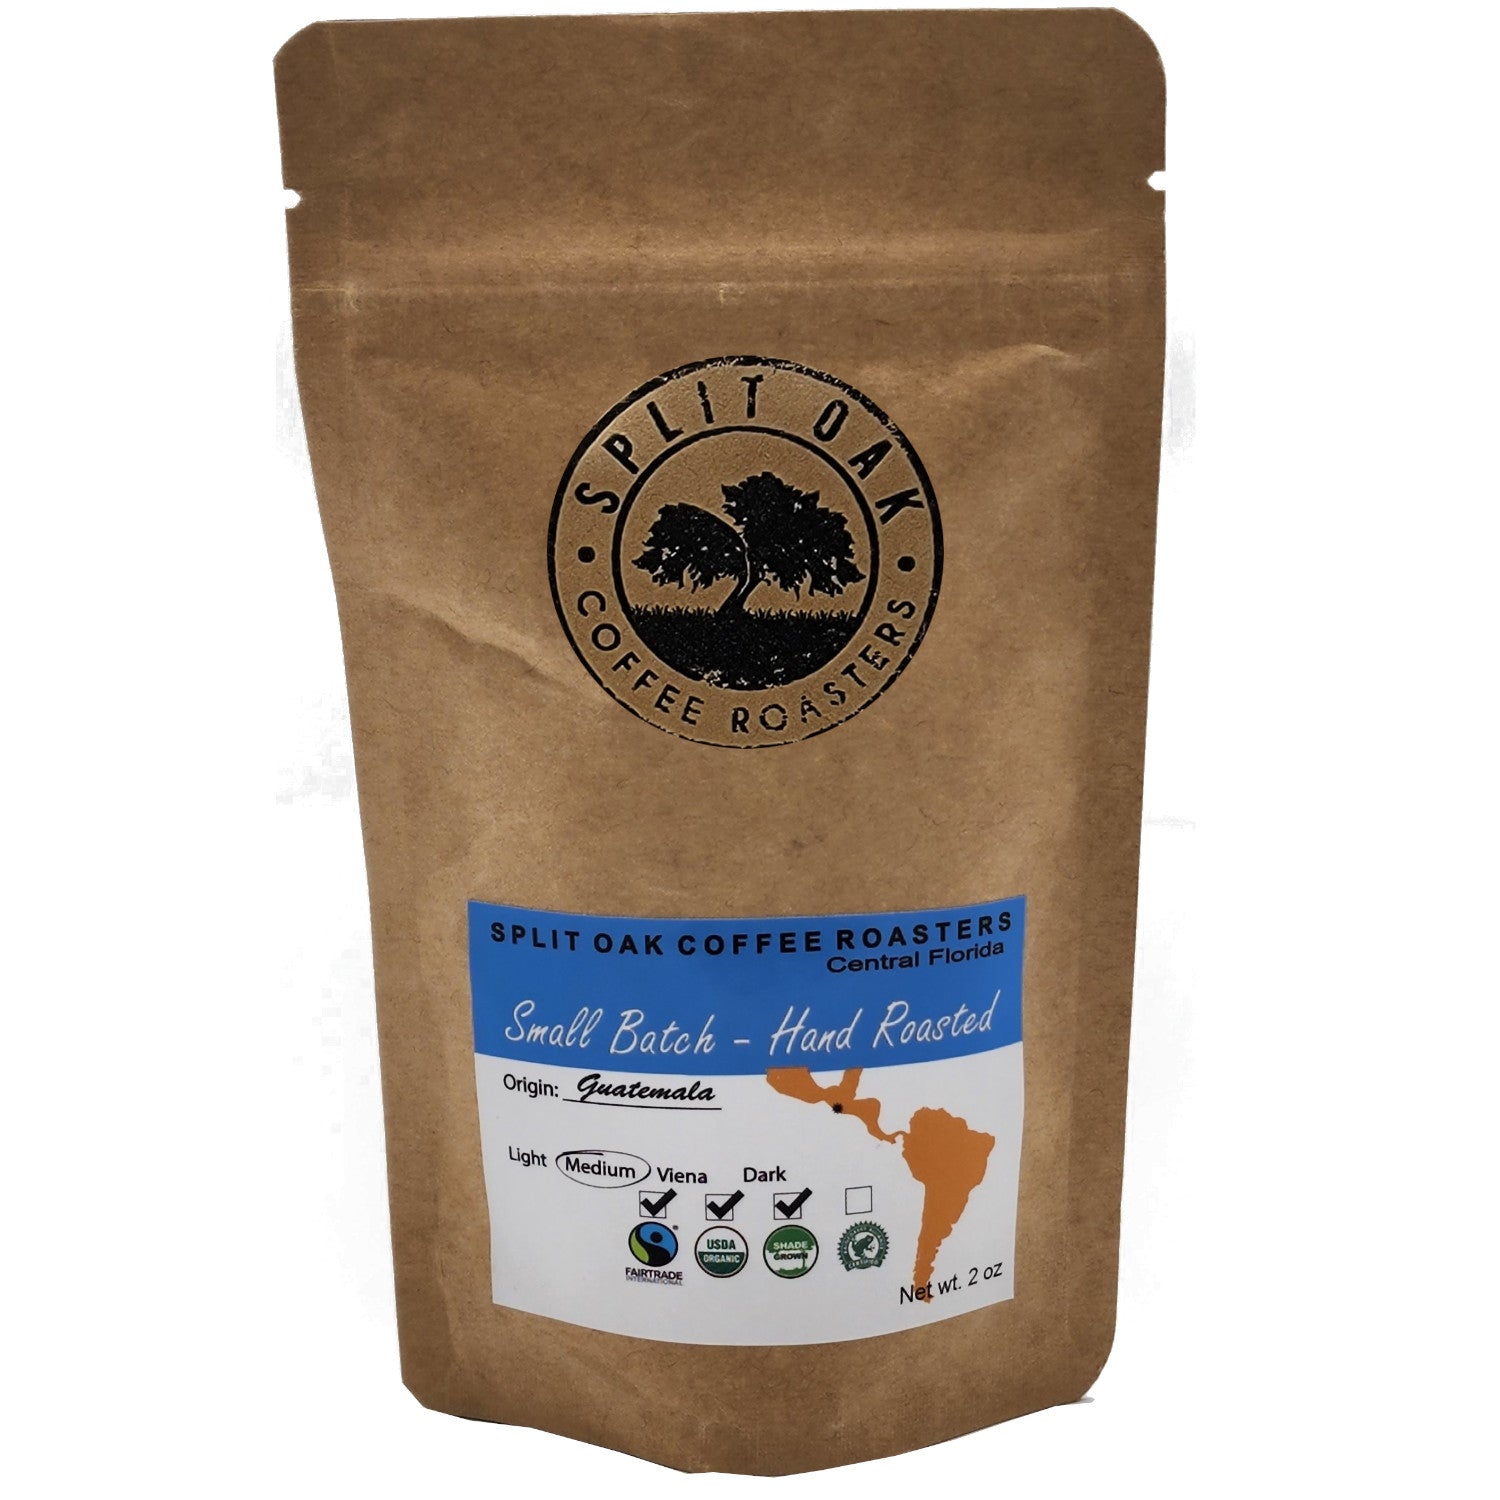 Coffee Samples 5 Pack Coffee Gift Set Las Americas. Gourmet Organic Medium  Roast whole Bean Coffee with Best Beans From Mexico, Guatemala, Peru,